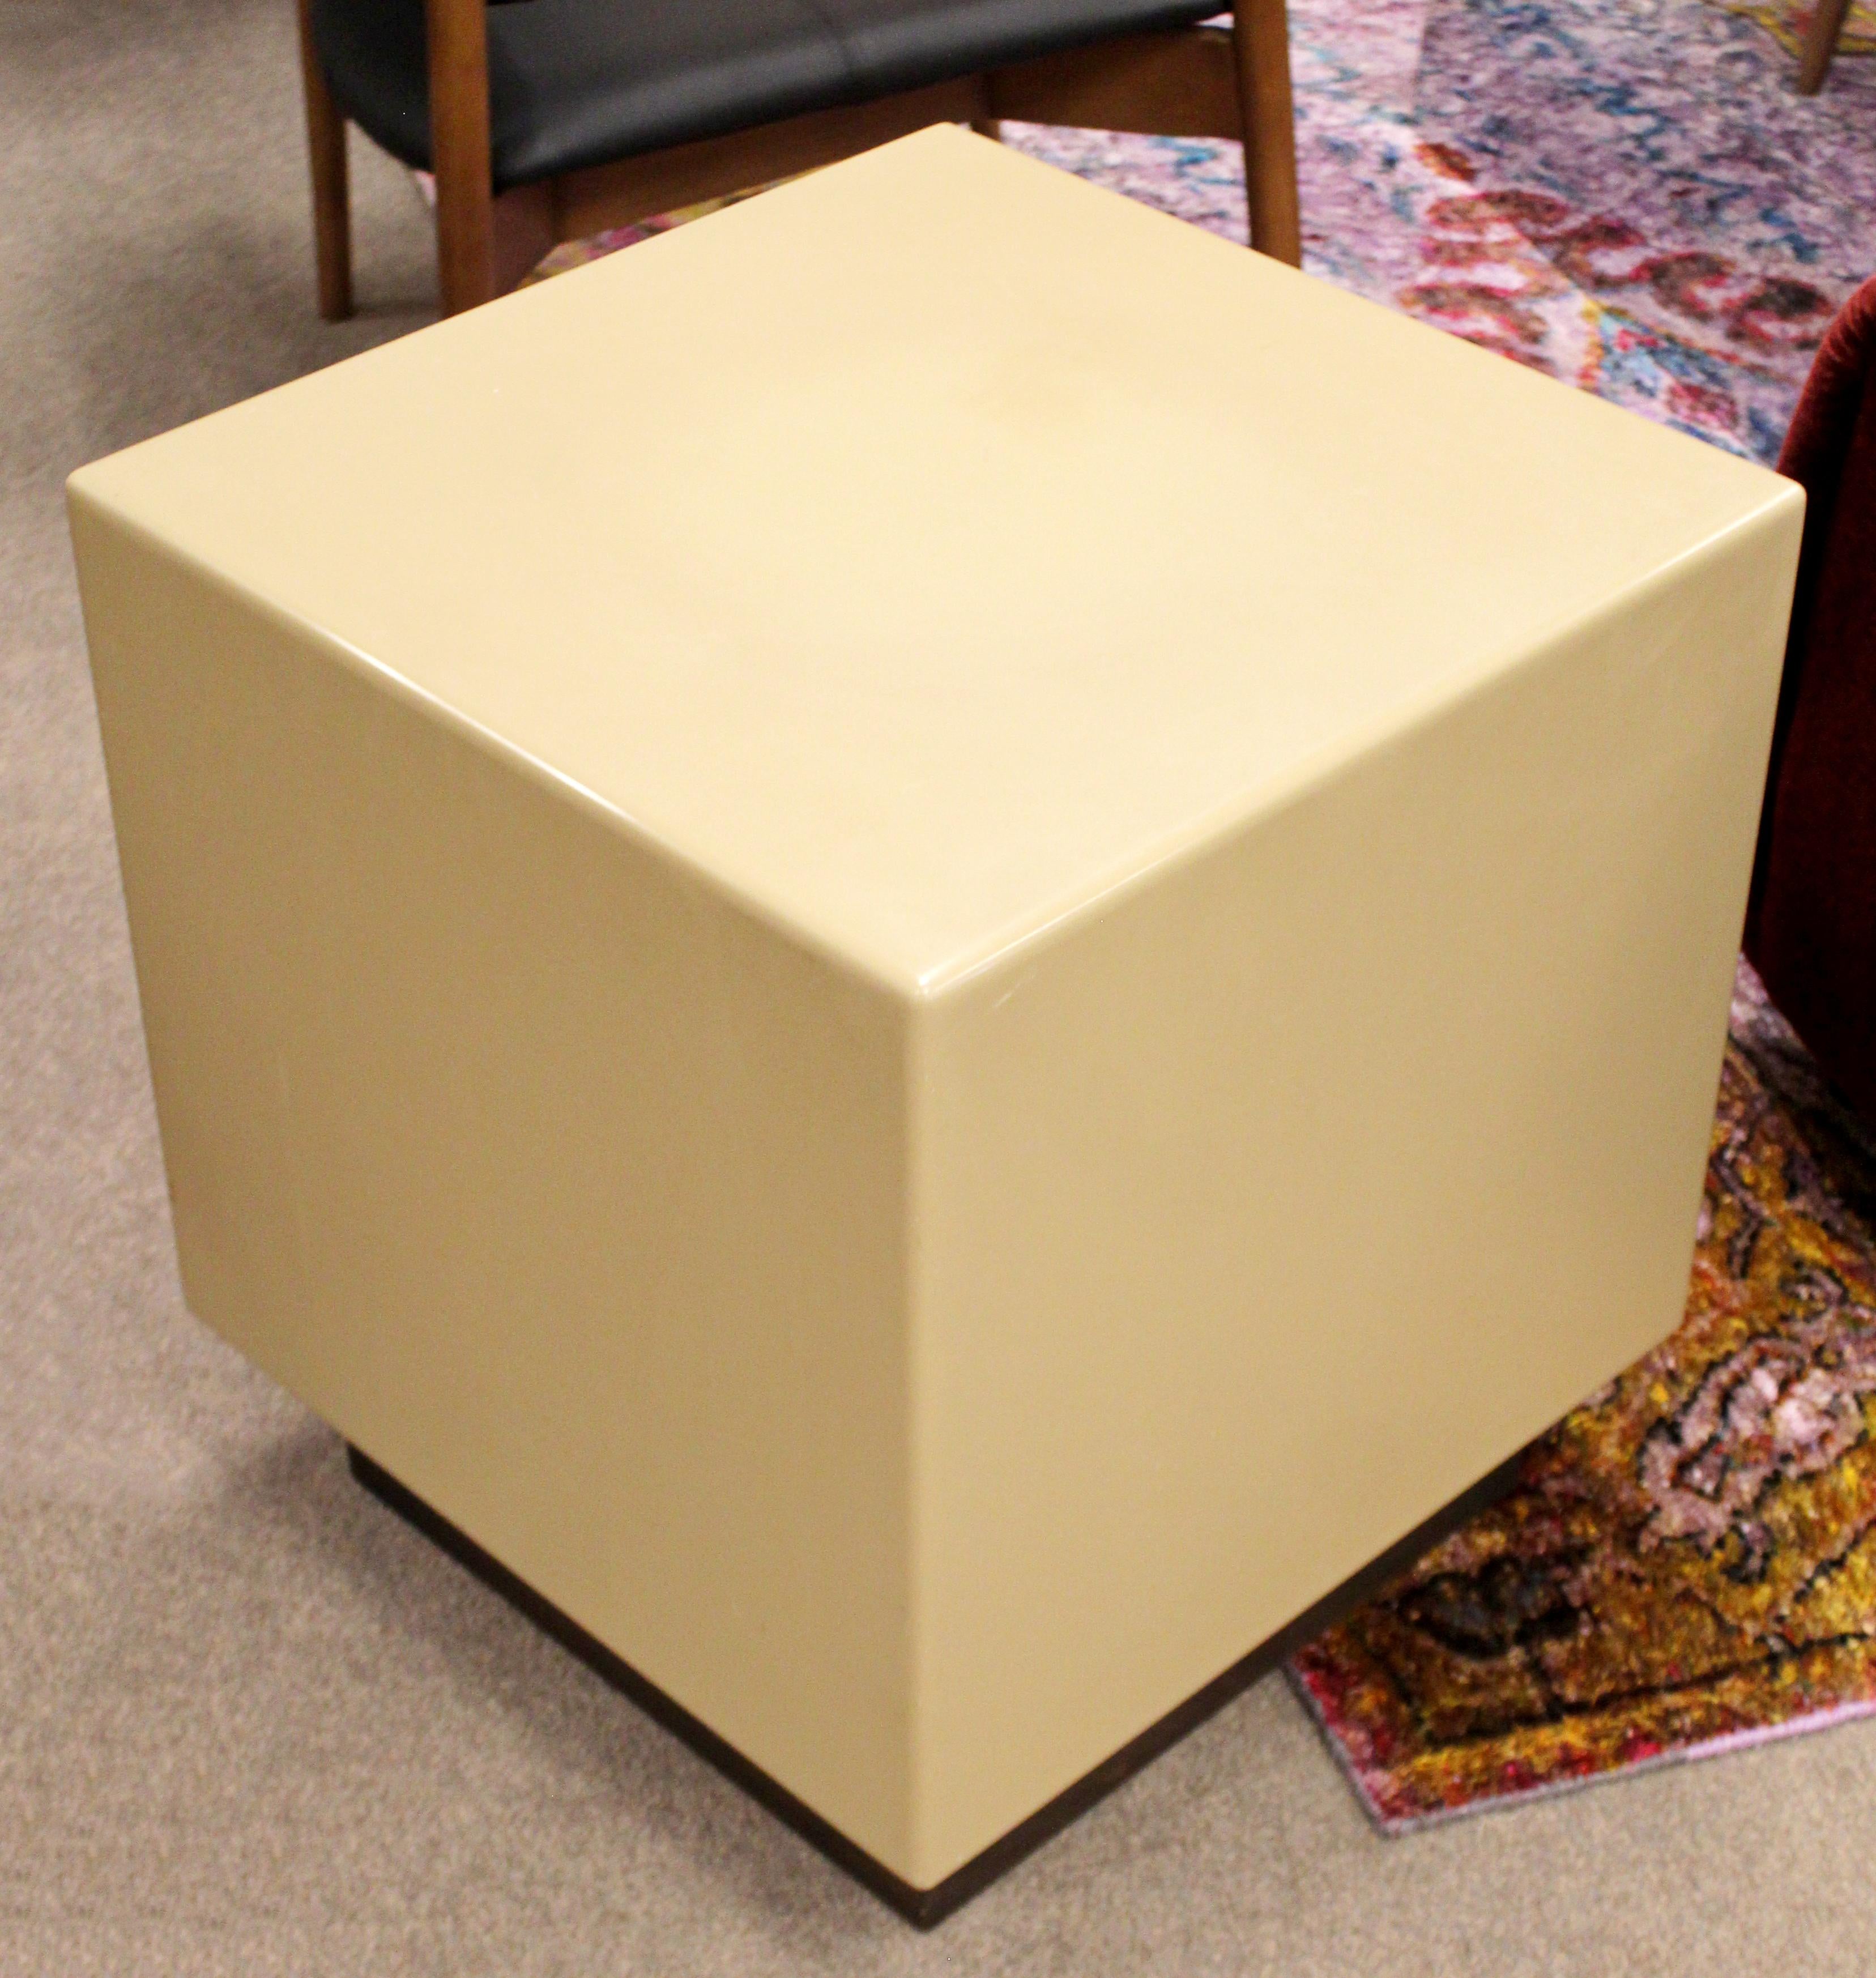 For your consideration is a square, acrylic side or end table, on a plainth base, by Metro, circa 1970s. In excellent vintage condition. The dimensions are 20